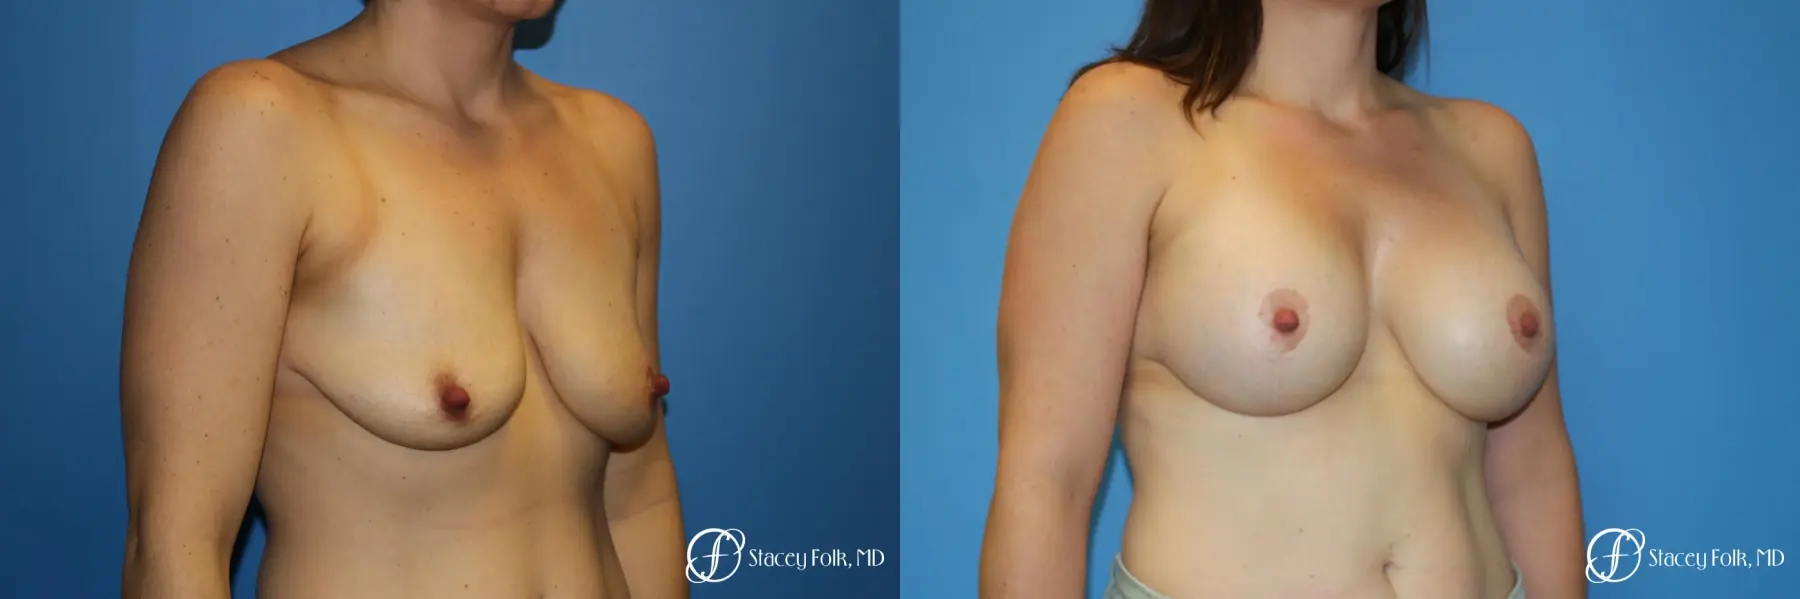 Denver Breast Lift (Mastopexy) with agumentation 9093 - Before and After 2